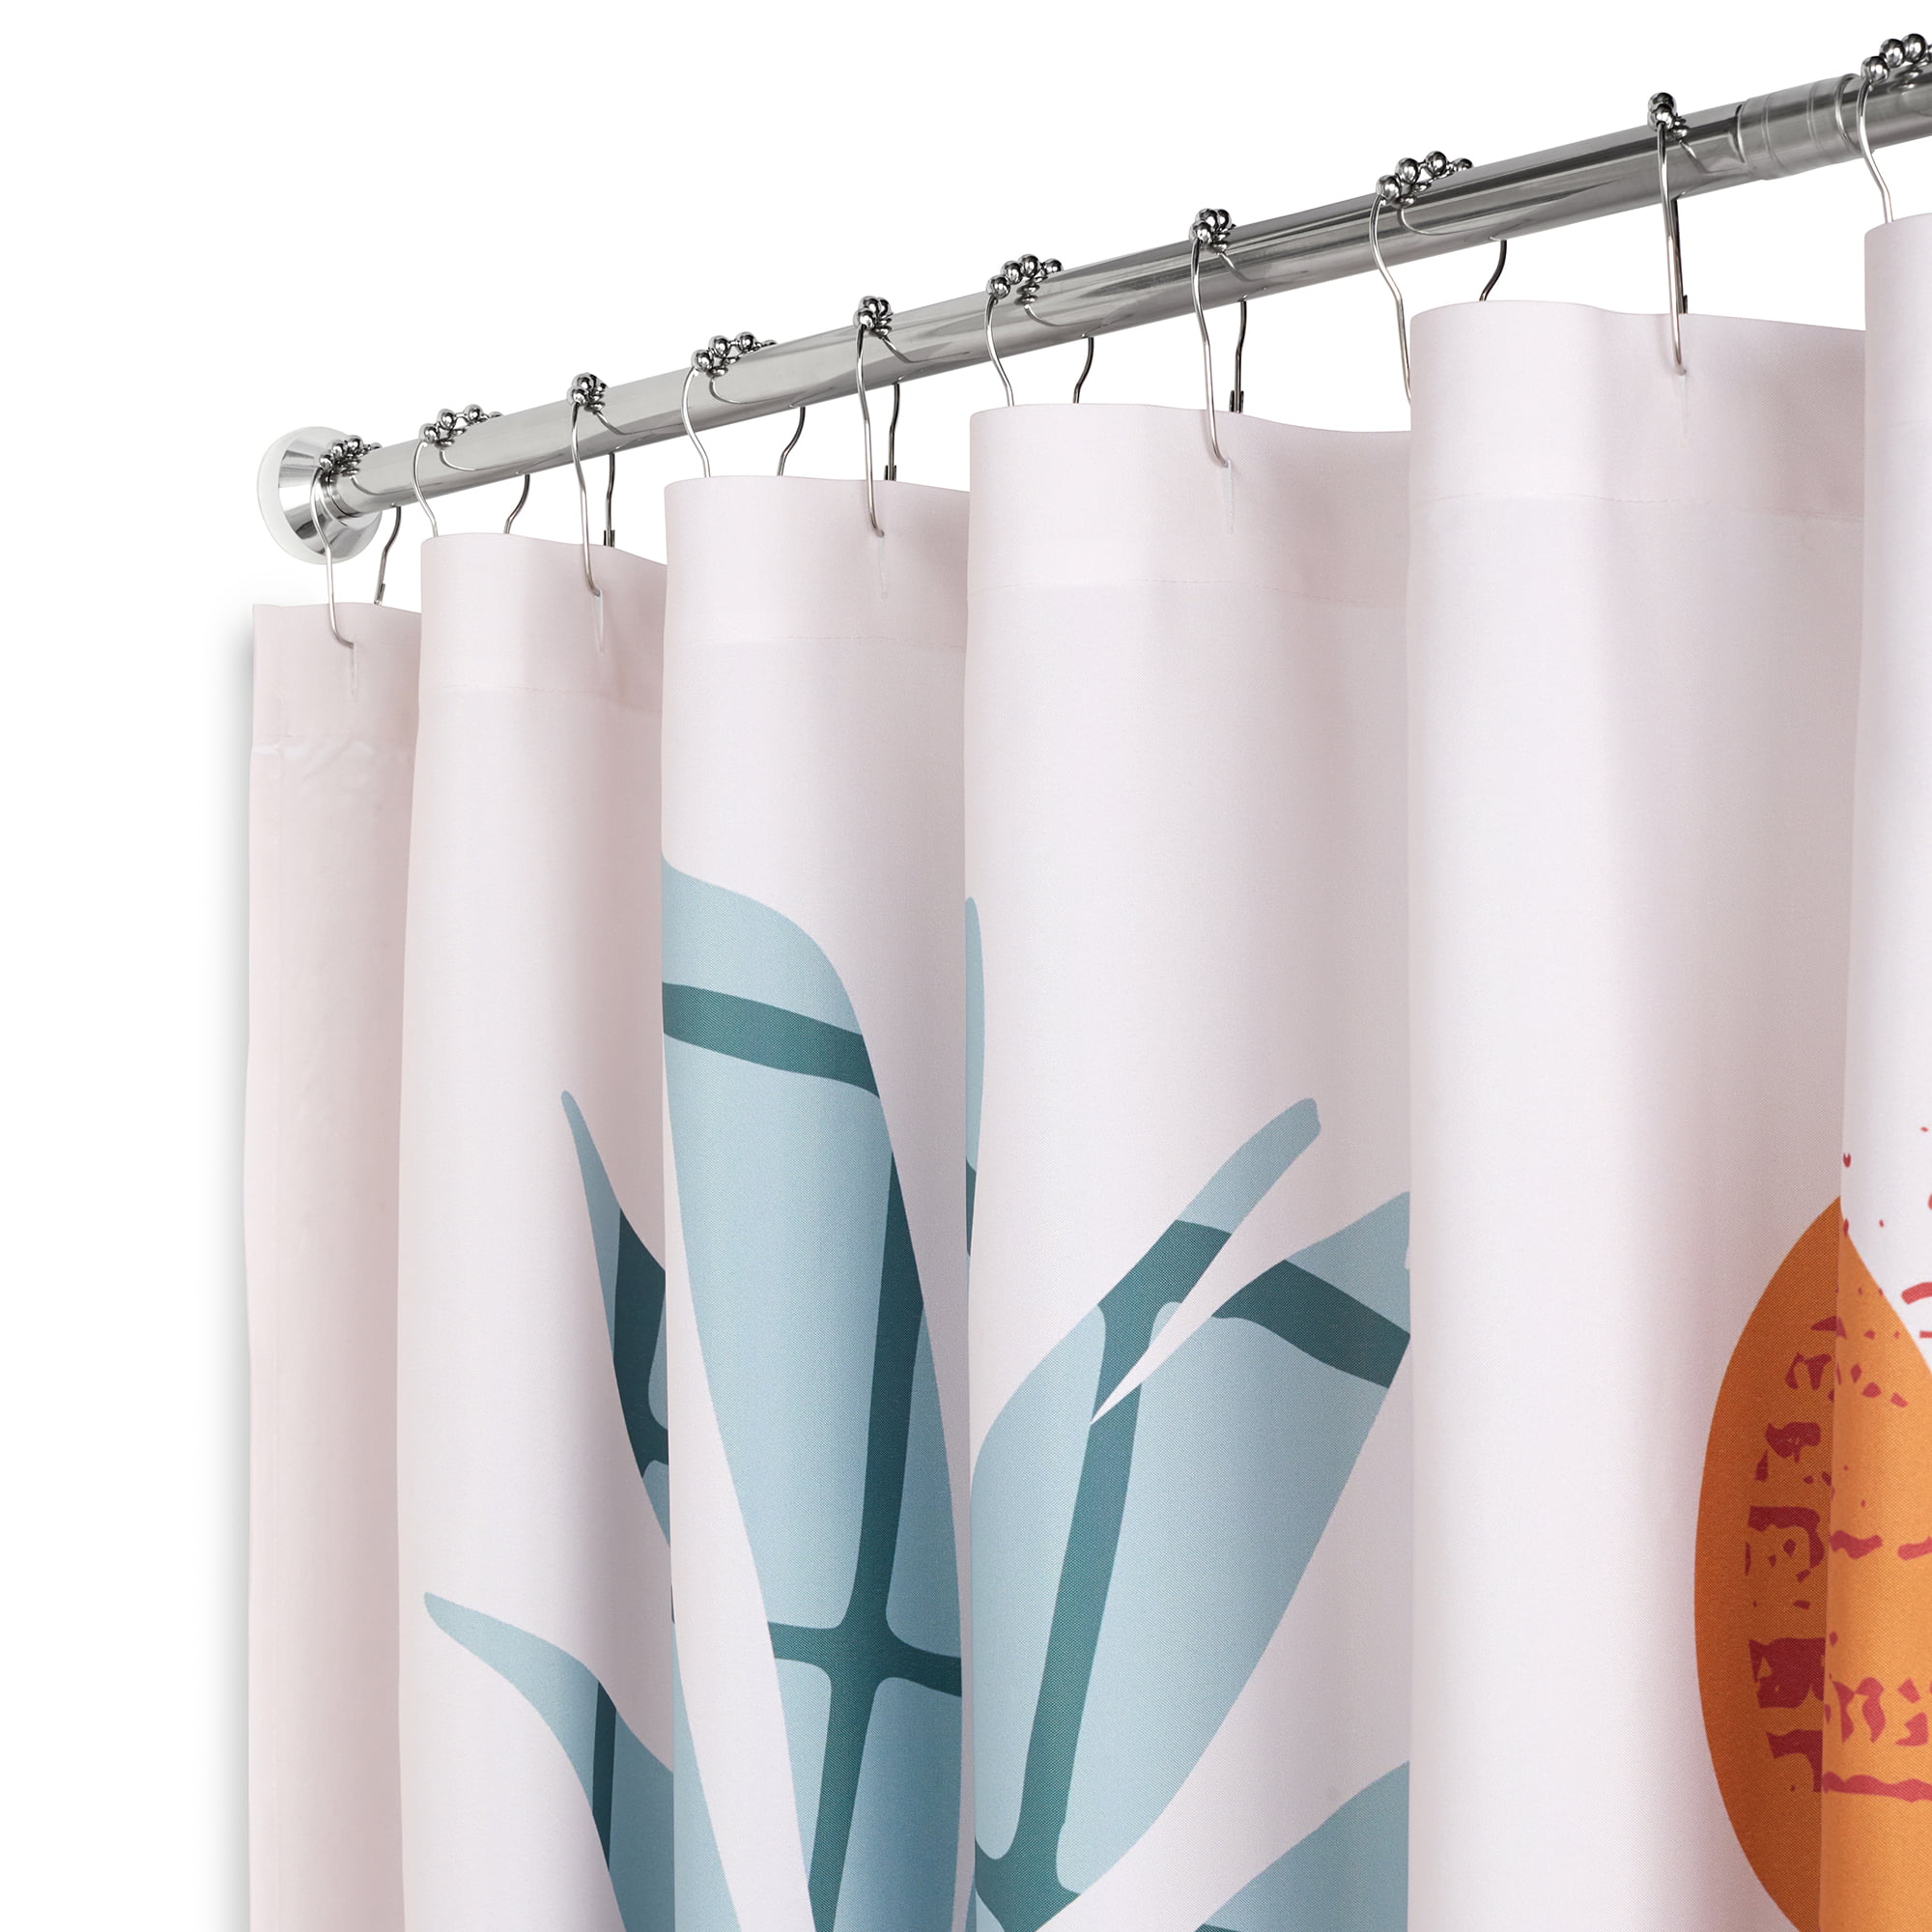 Shower curtain top